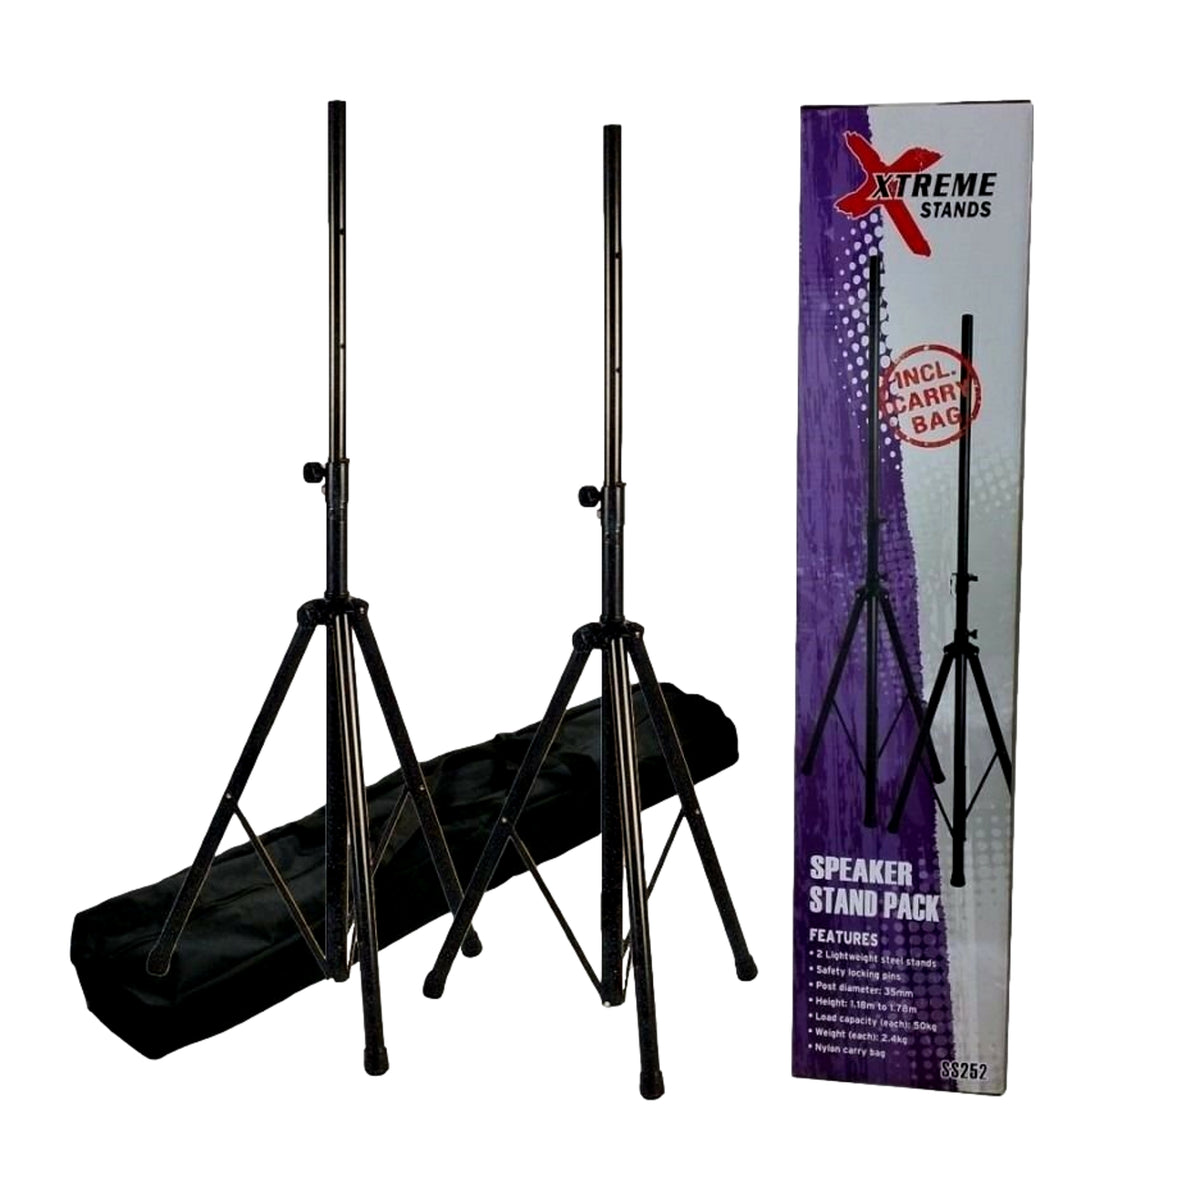 XTREME SS252 PA Speaker Stand Pack Includes Bag